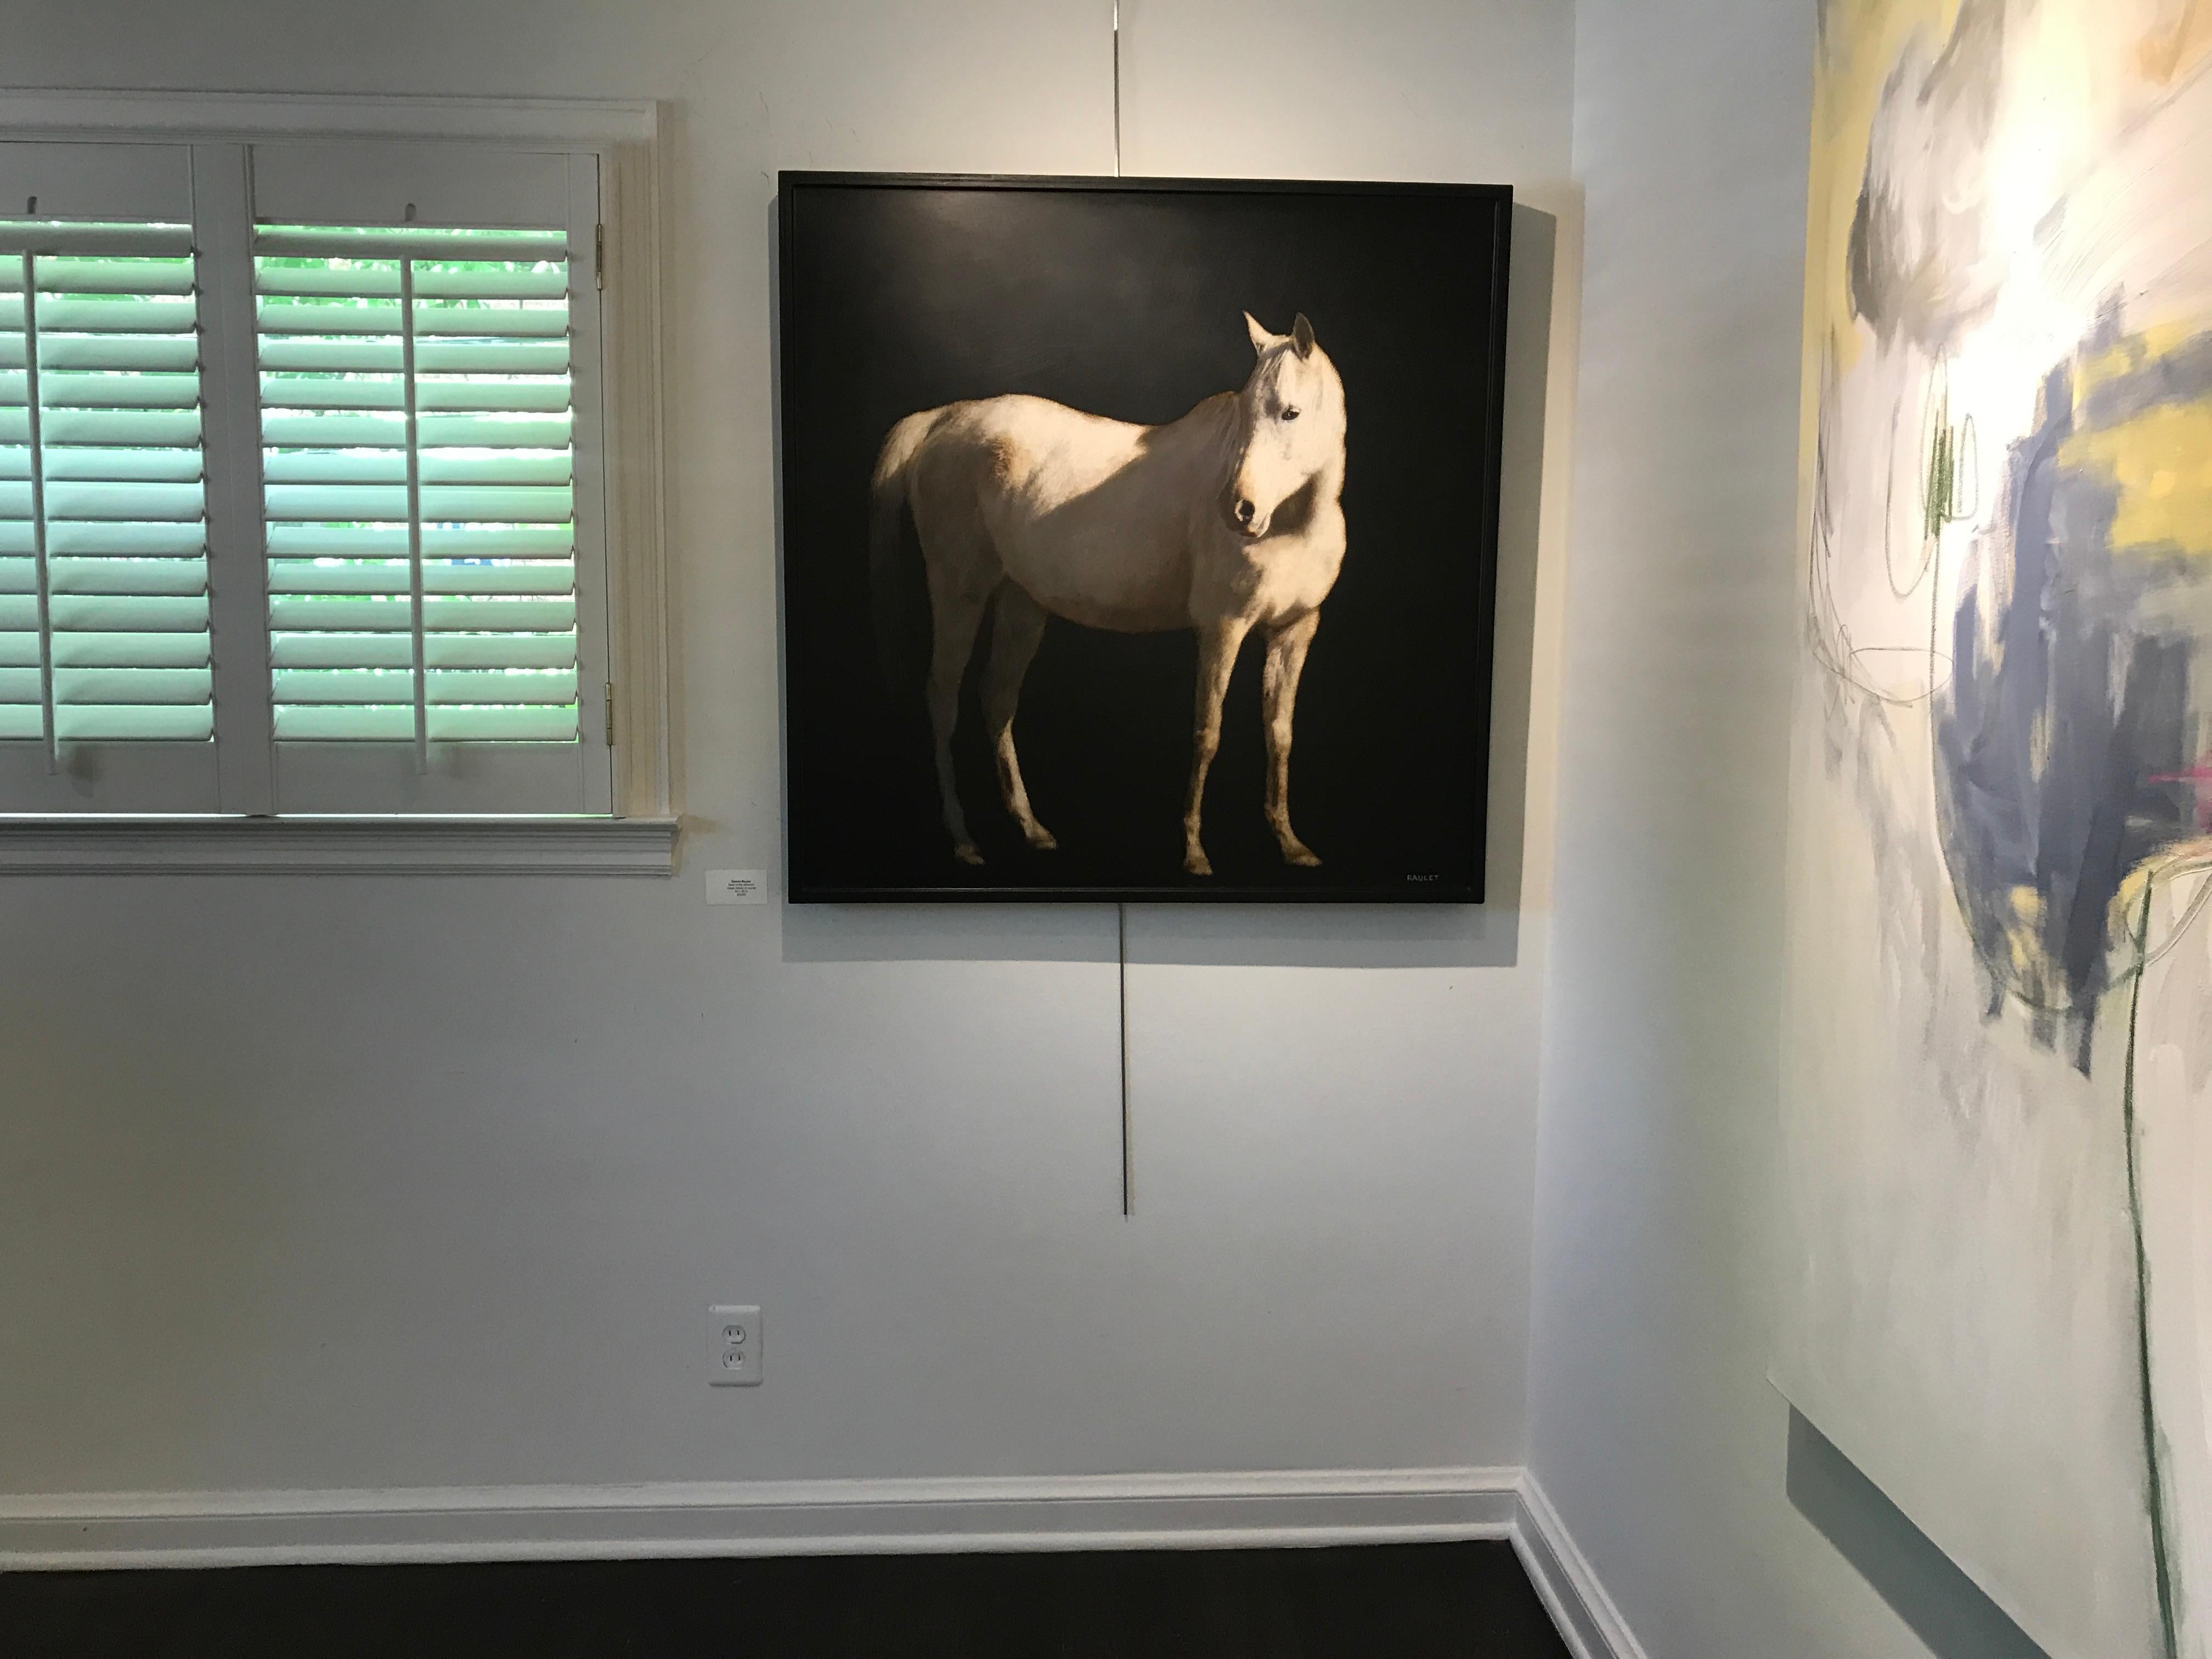 'Spur of the Moment' is a 2019 figurative mixed media on board horse painting created by American artist Dawne Raulet. Featuring a dark background allowing the subject to capture the entirety of the light, the painting depicts a white horse seen